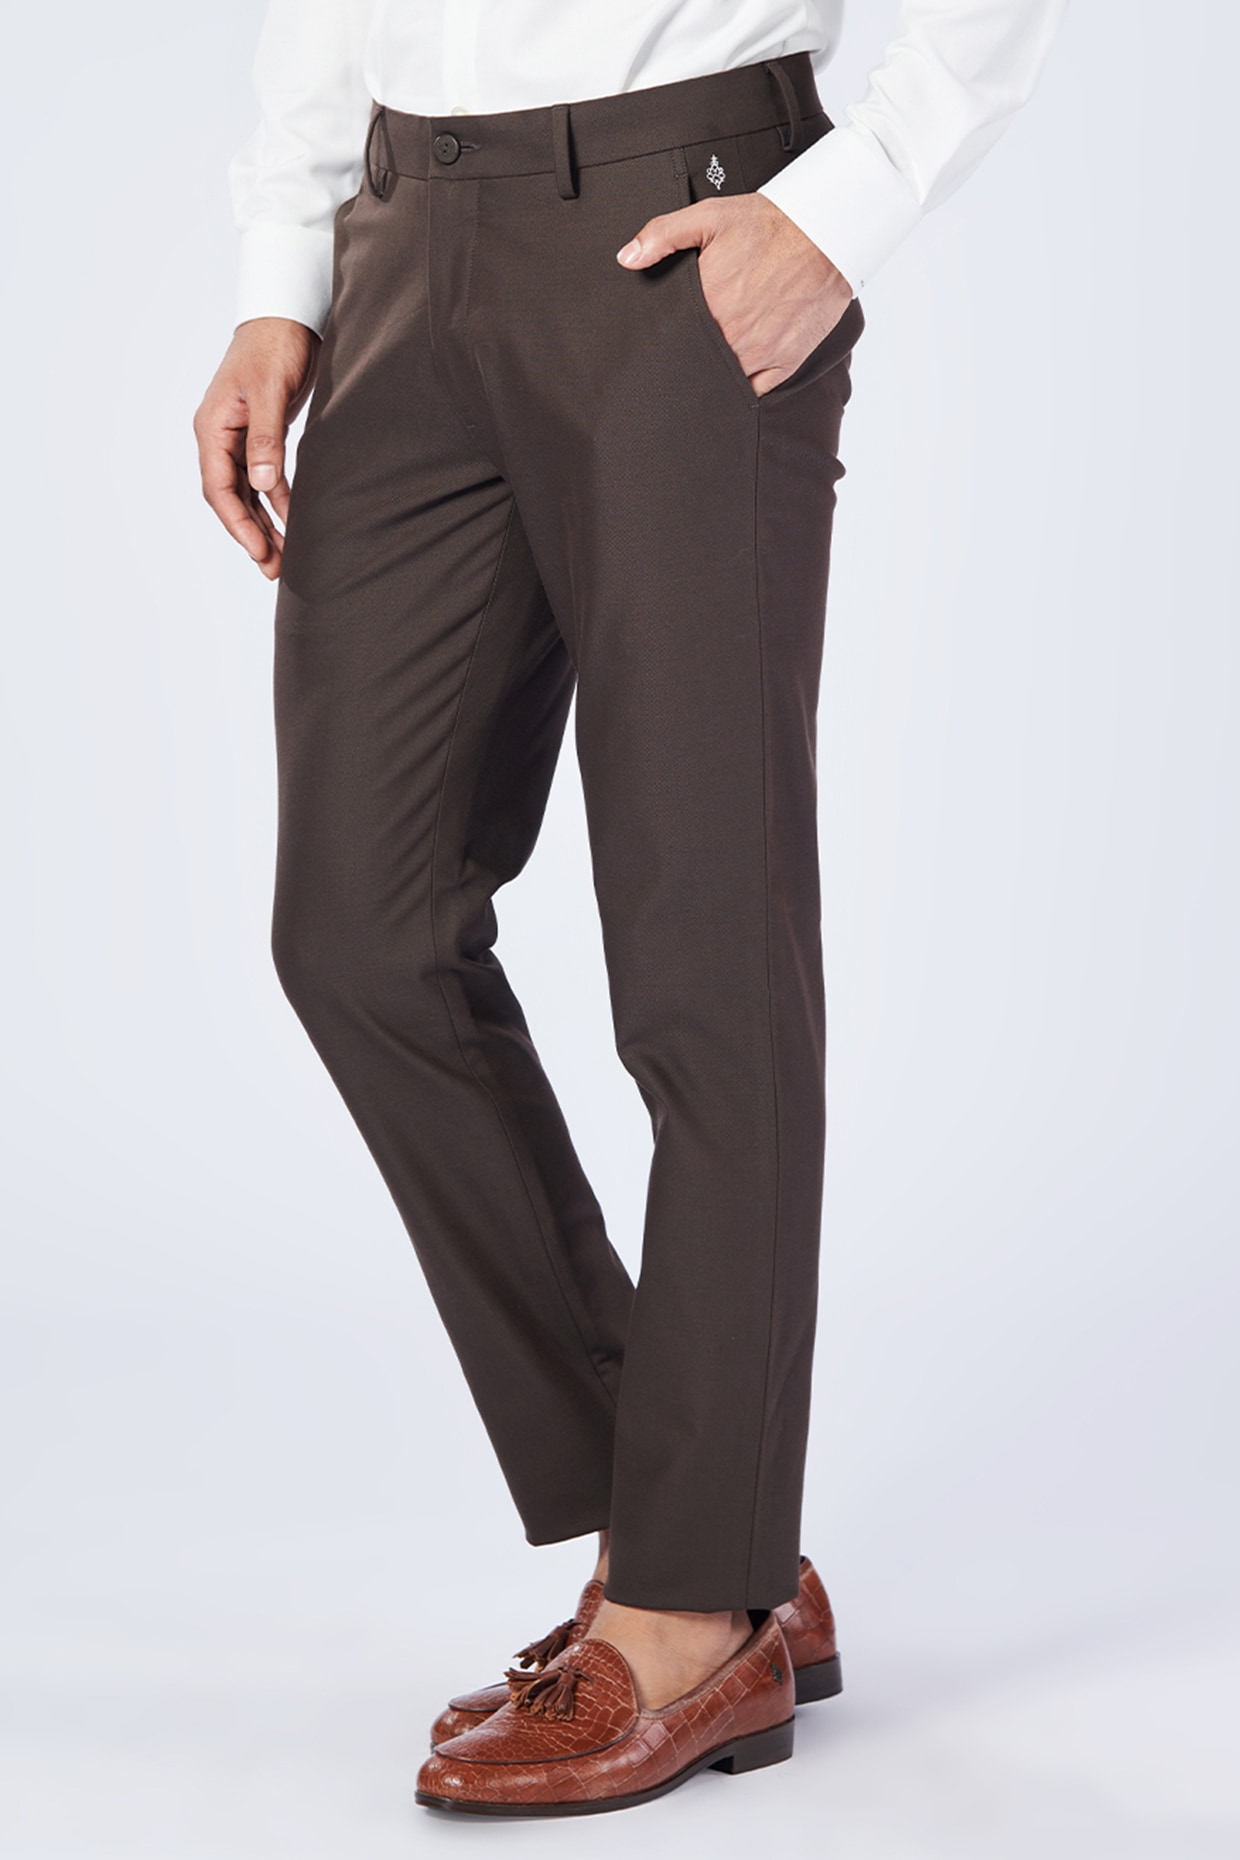 10 Stylish Designs of Formal Trousers To Get Decent Look